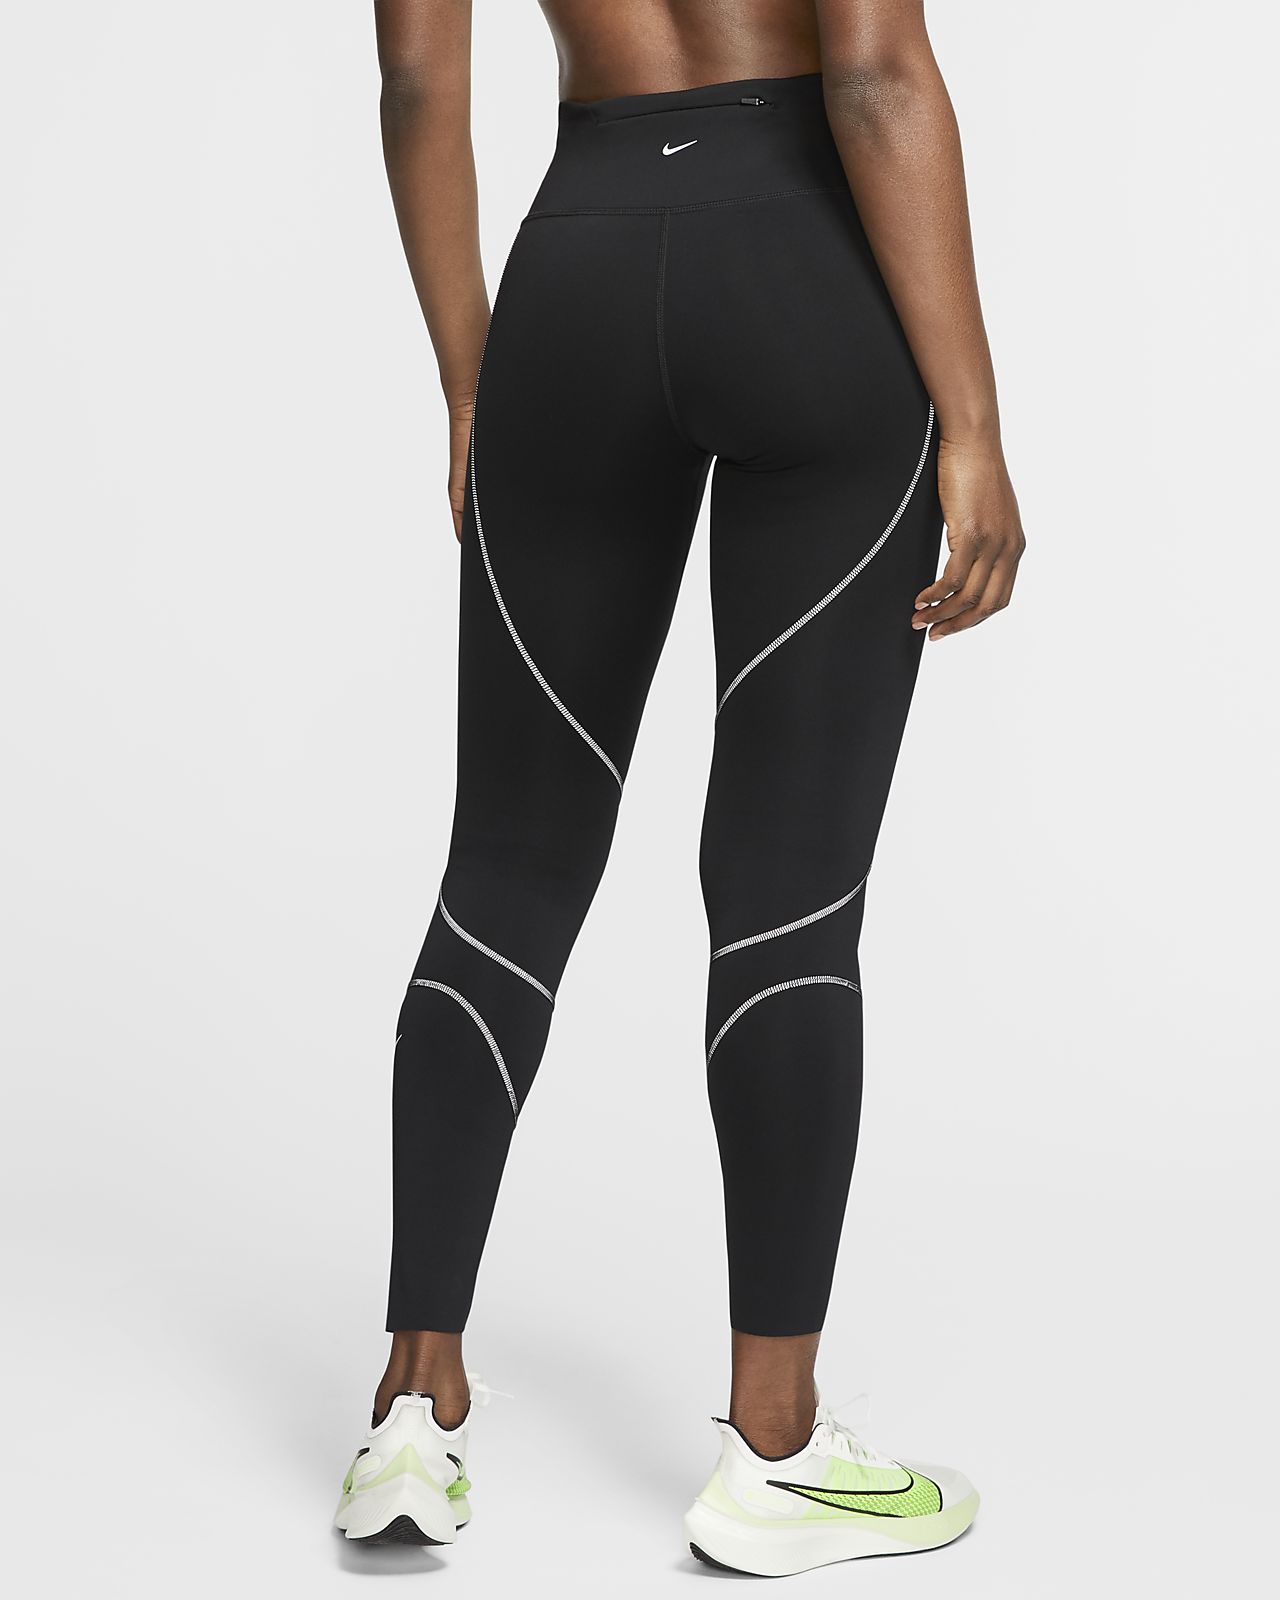 nike women's epic lux tights \u003e Up to 78 